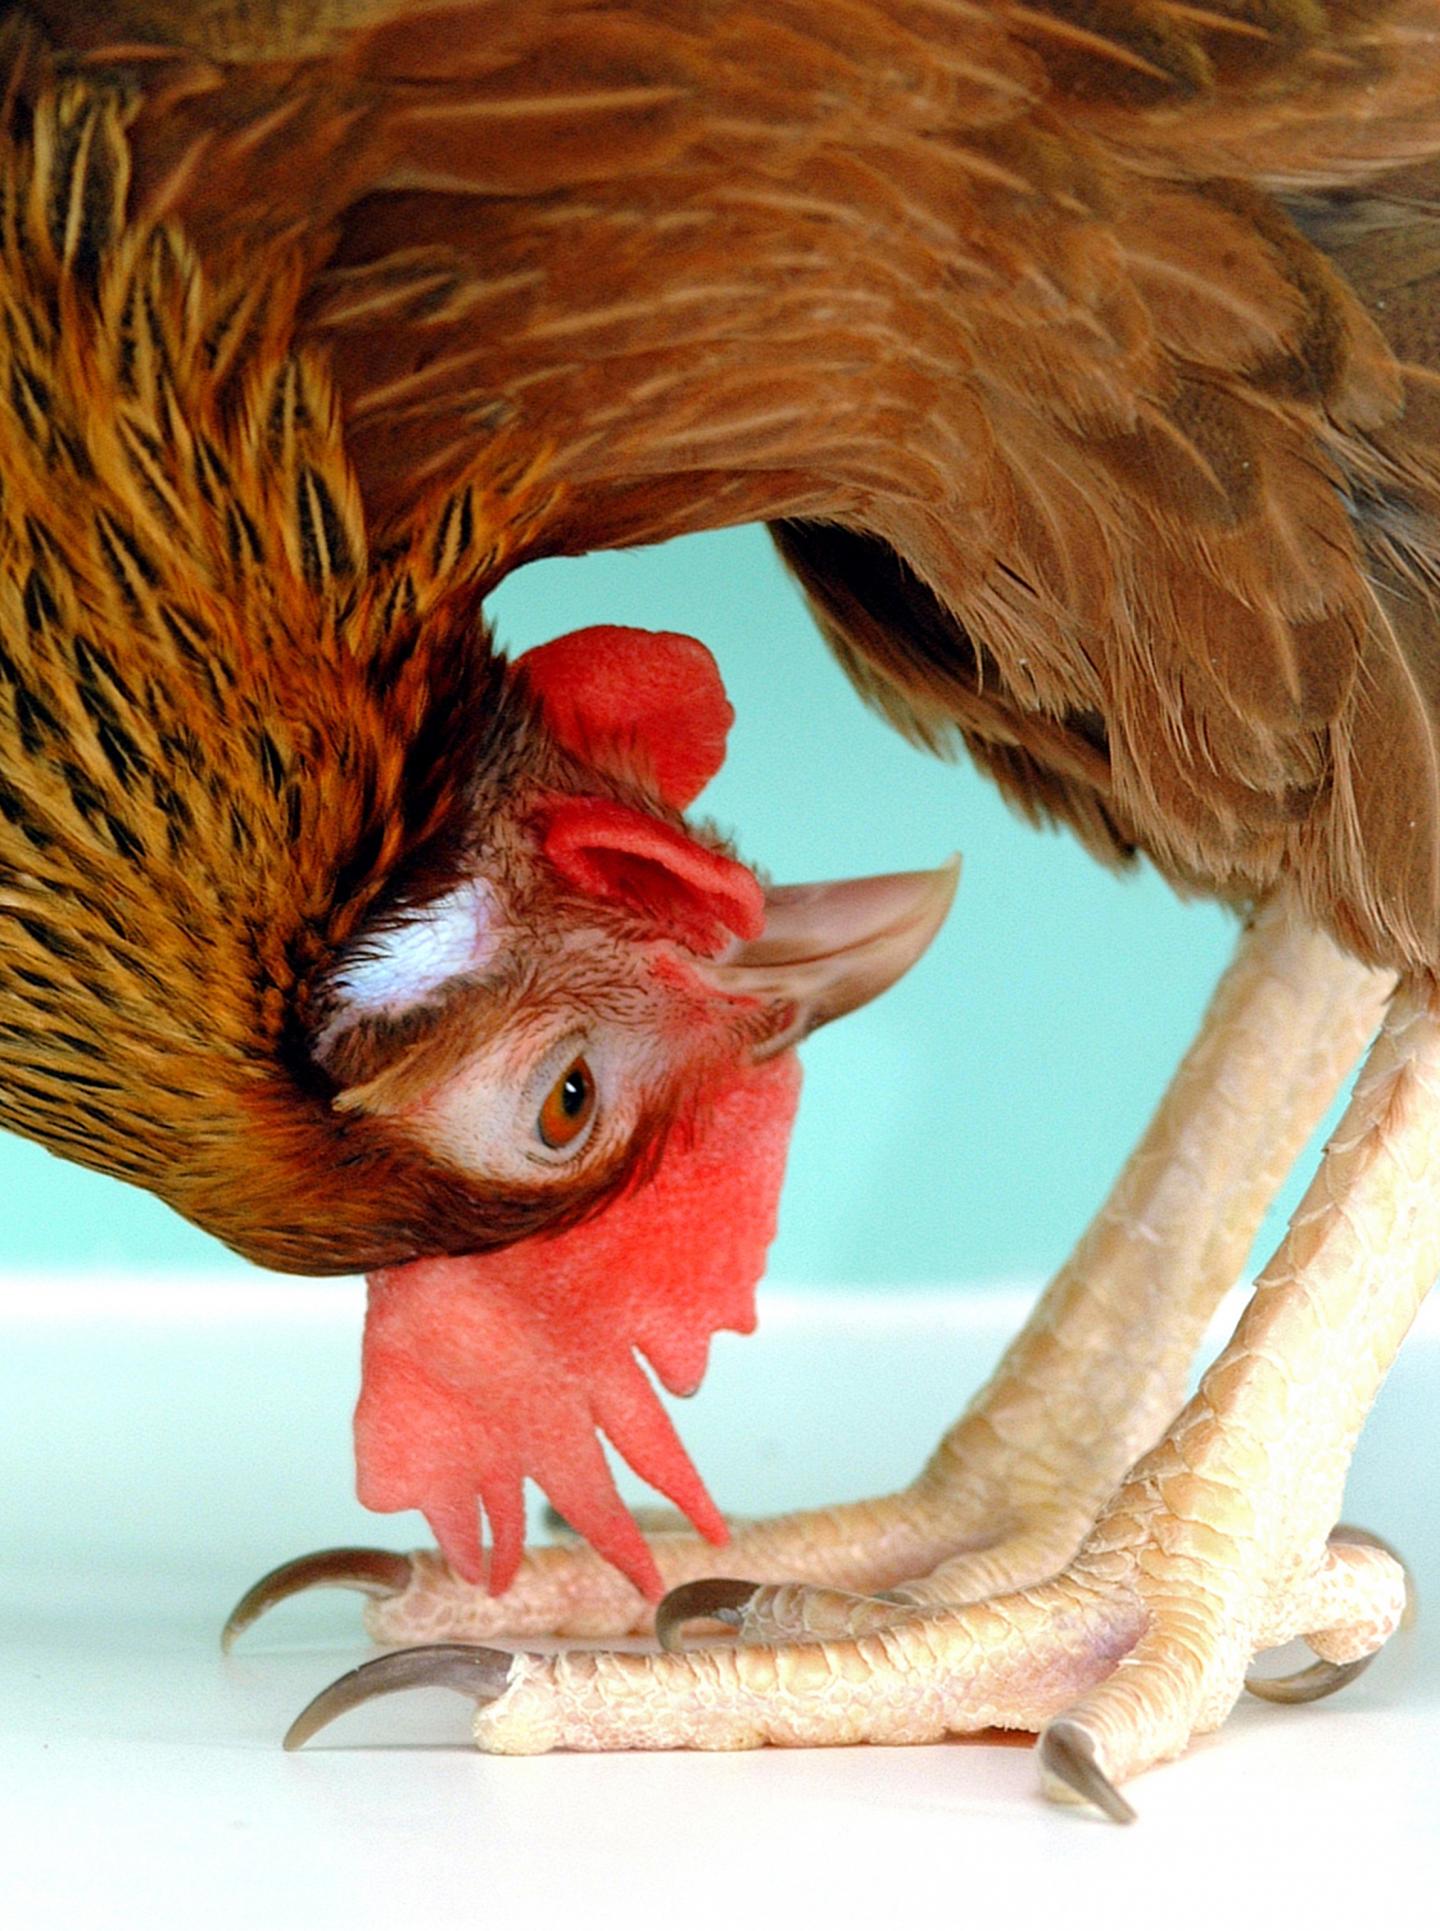 Hens that Lay Human Proteins in their Eggs Offer Future therapy Hope (1 of 2)